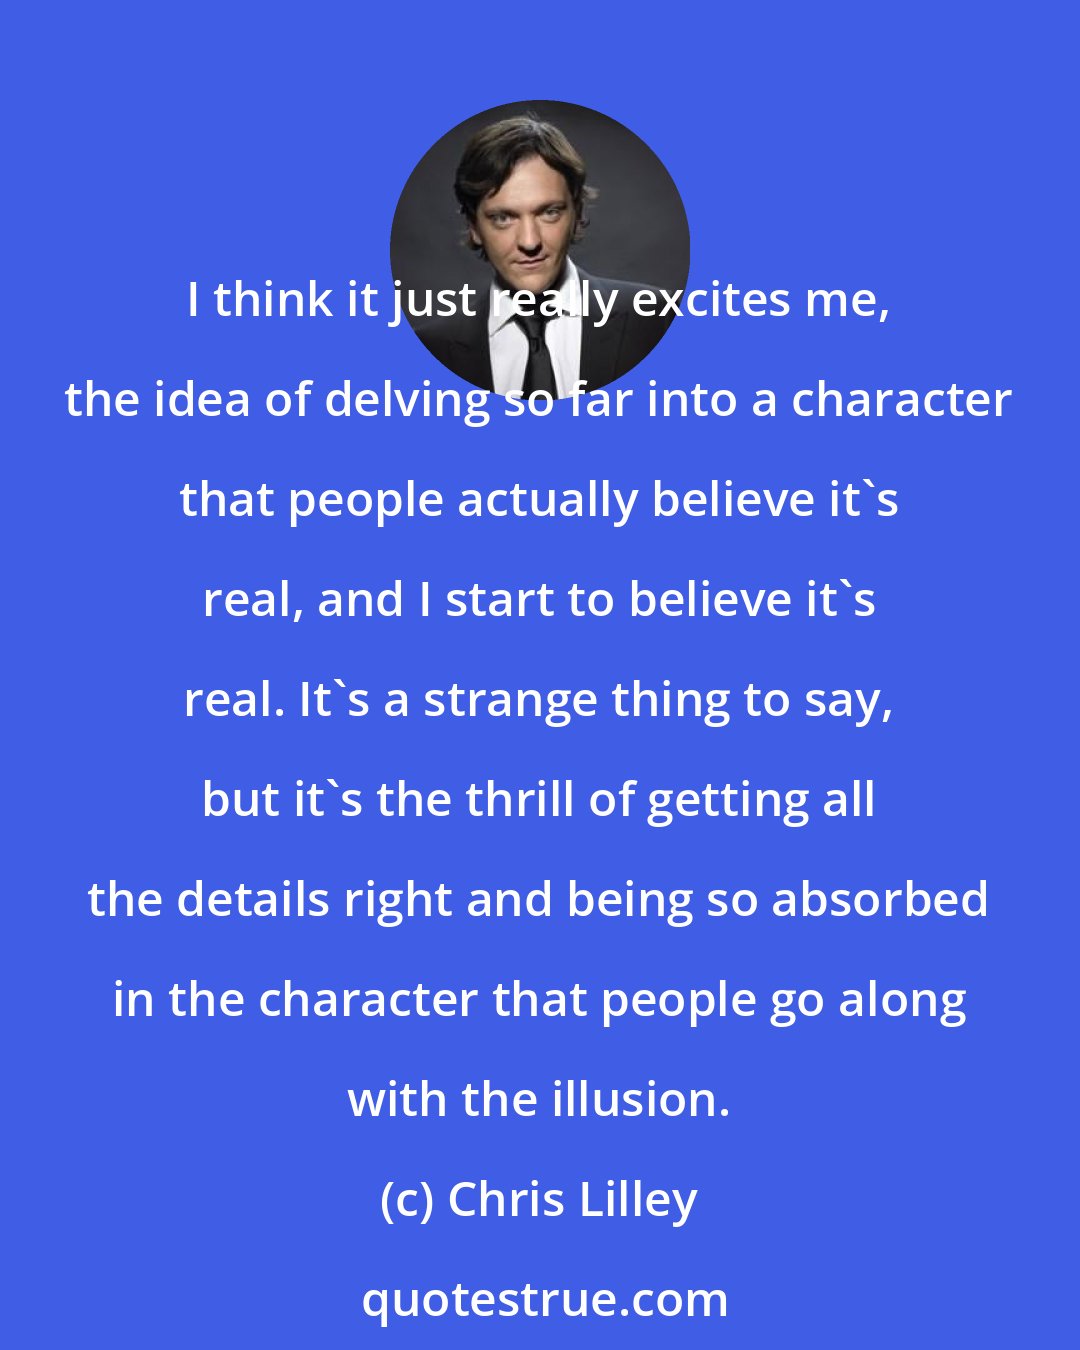 Chris Lilley: I think it just really excites me, the idea of delving so far into a character that people actually believe it's real, and I start to believe it's real. It's a strange thing to say, but it's the thrill of getting all the details right and being so absorbed in the character that people go along with the illusion.